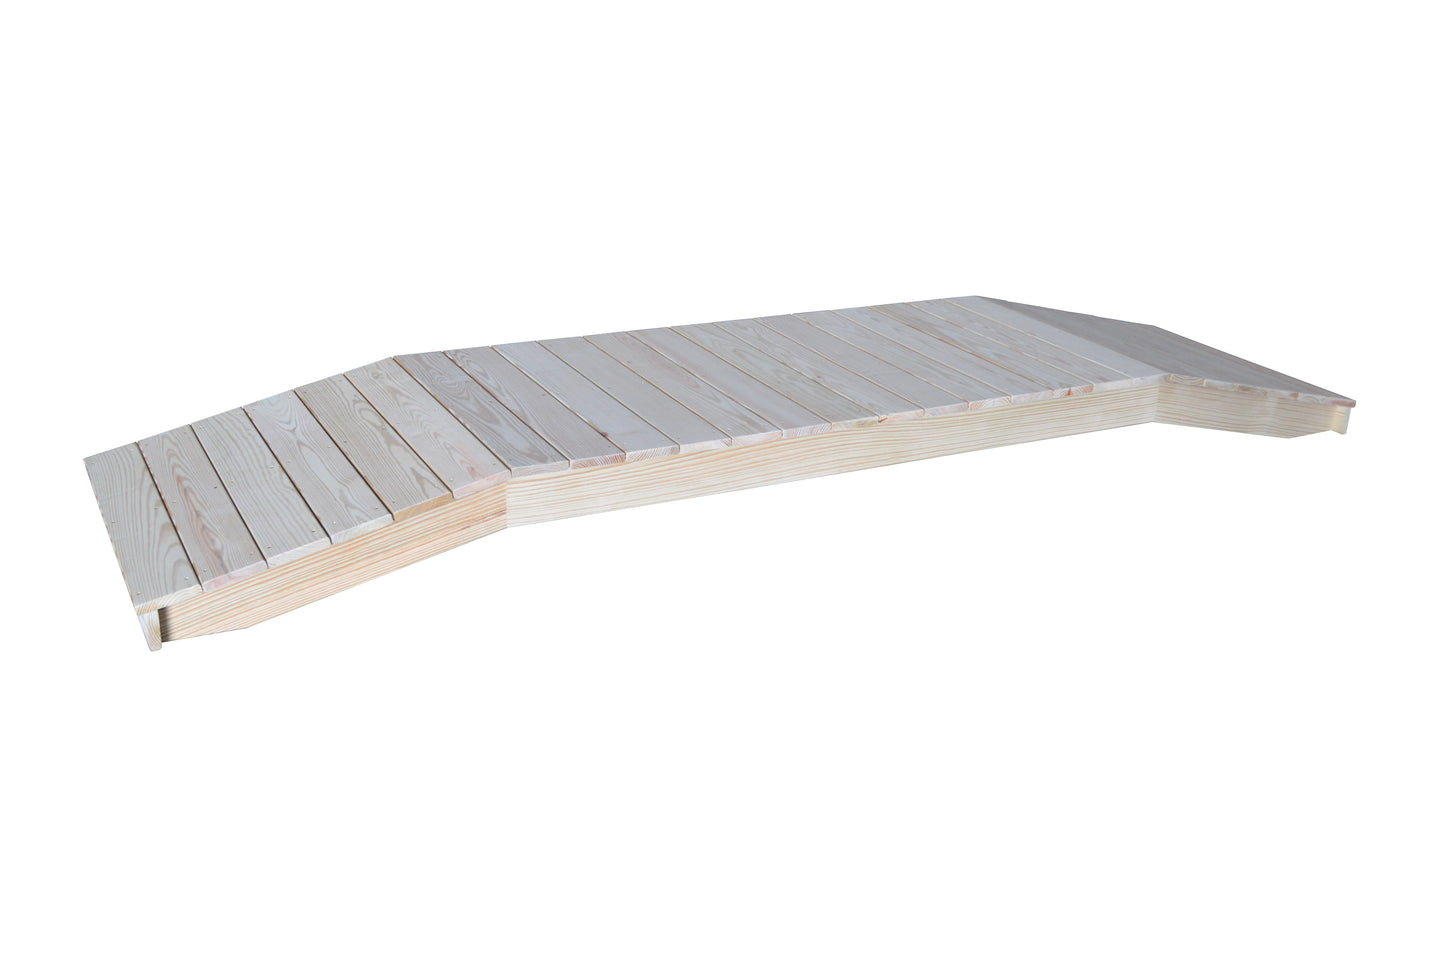 A&L Furniture Pressure Treated Pine 3'  x  10' Standard Plank Bridge - LEAD TIME TO SHIP 10 BUSINESS DAY